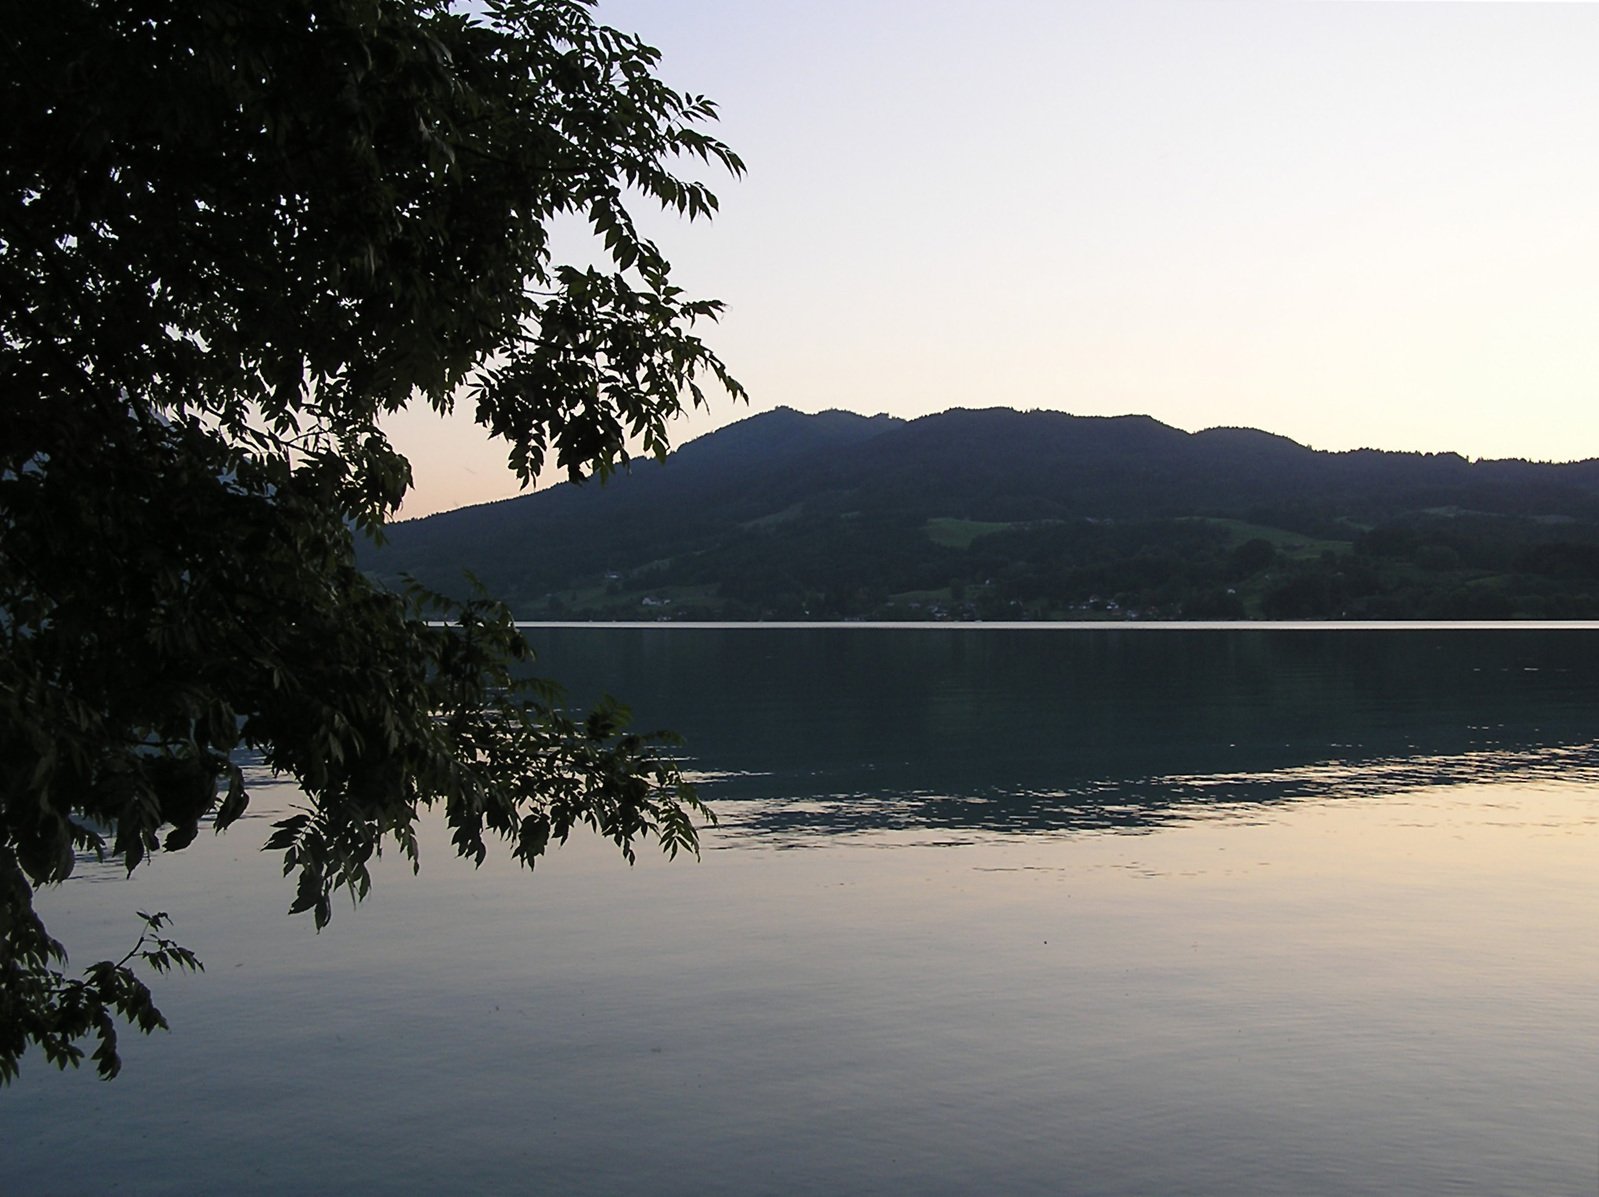 the view of a lake with mountains in the background